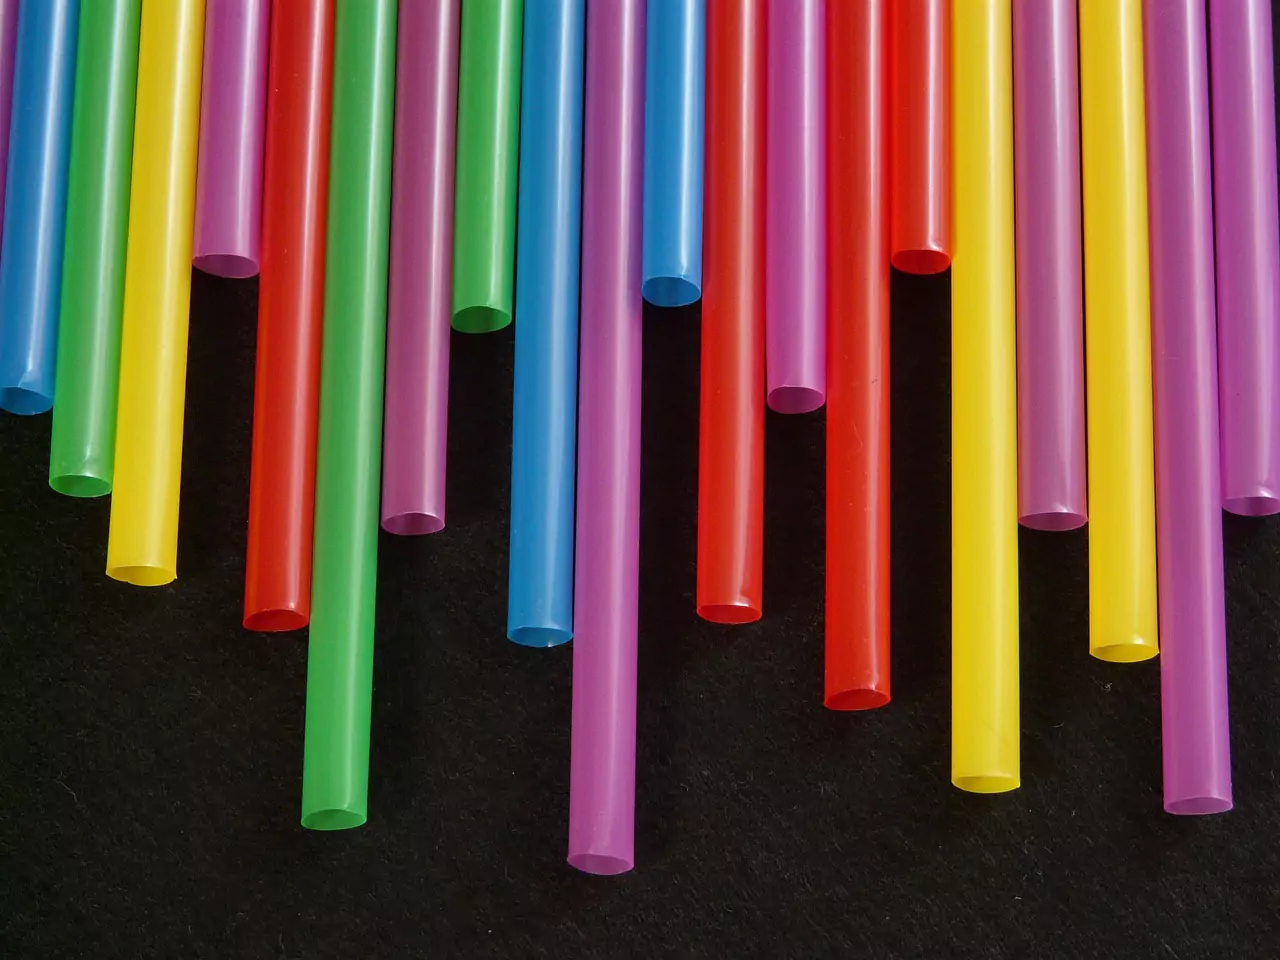 pp material example straw drinking usage material